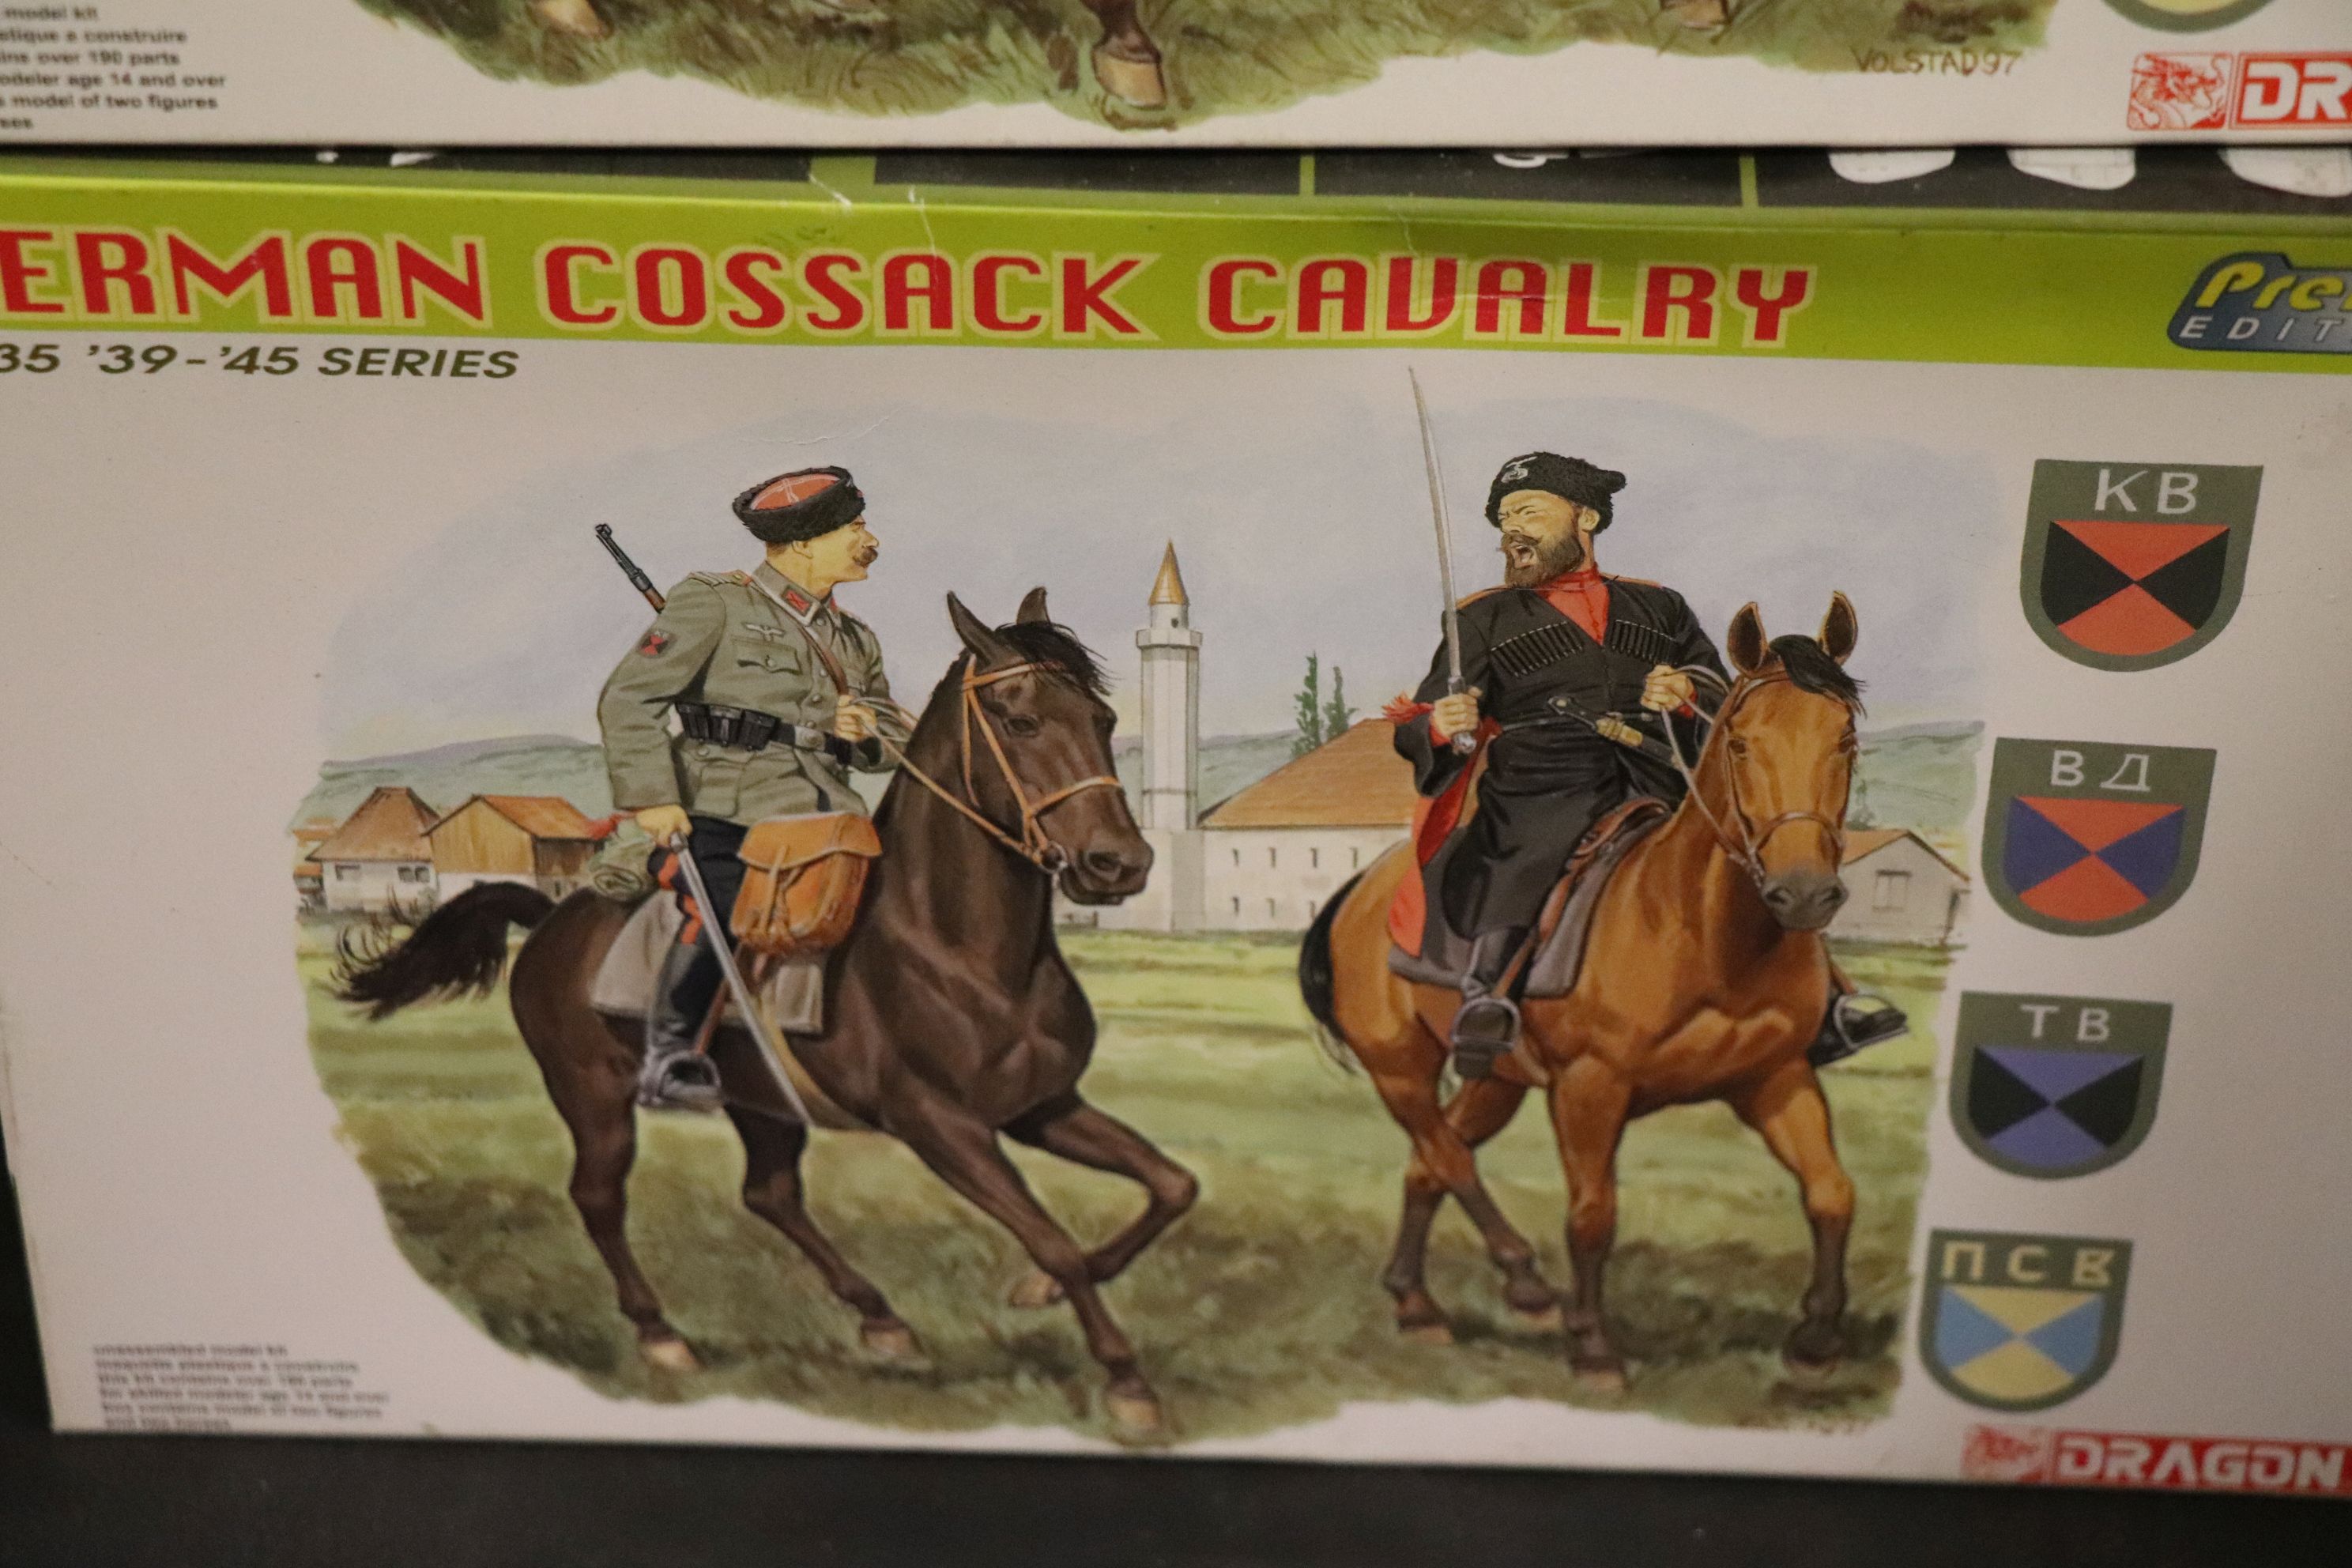 Two Boxed Dragon German Cossack Cavalry Model Kits, Polar Lights Boxed and Sealed Forbidden Planet - Image 3 of 5